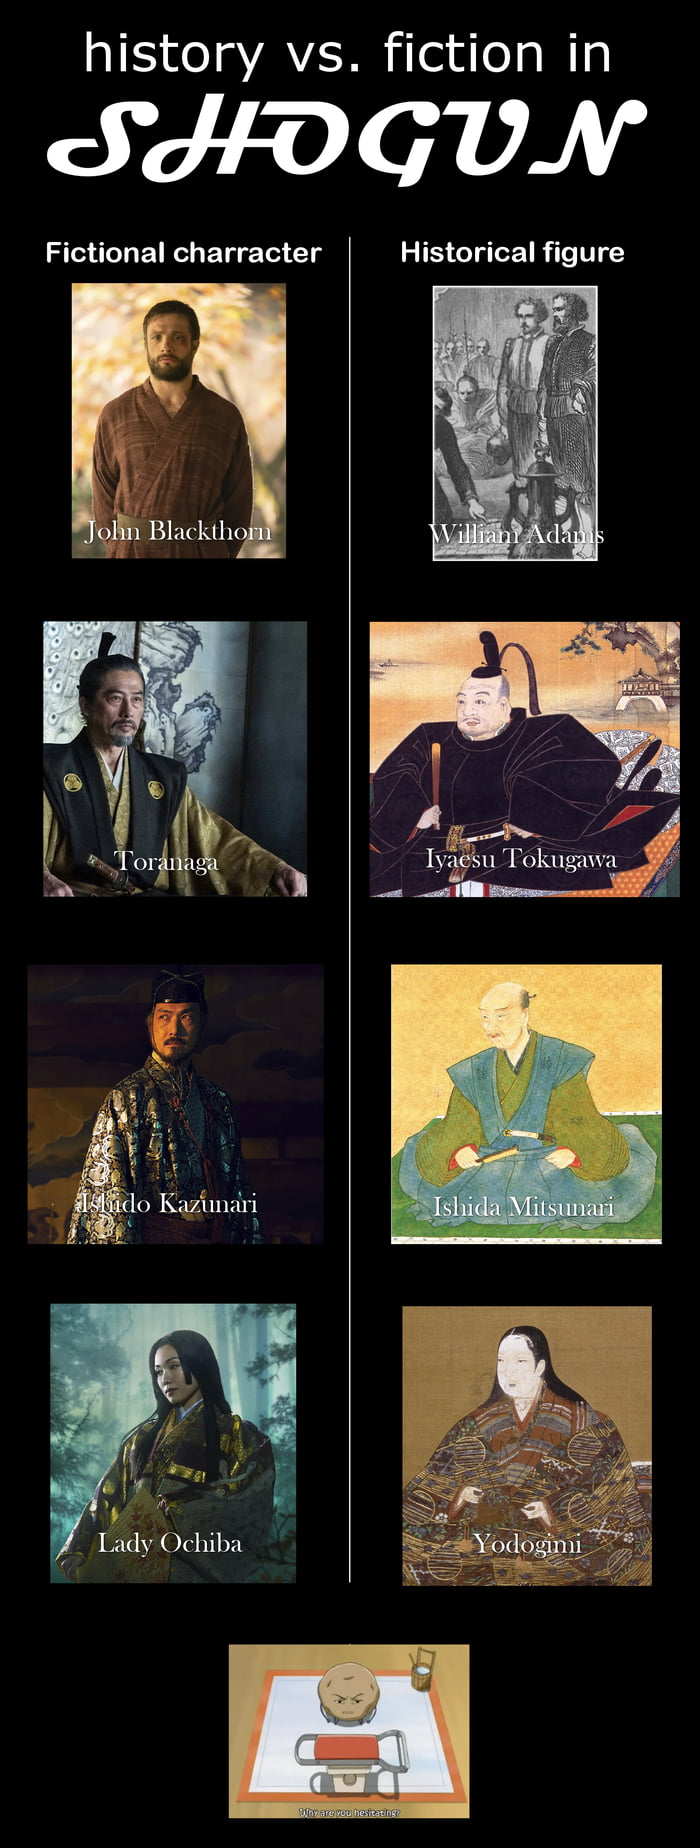 "Shogun" is historically based on the rise of the Tokugawa s